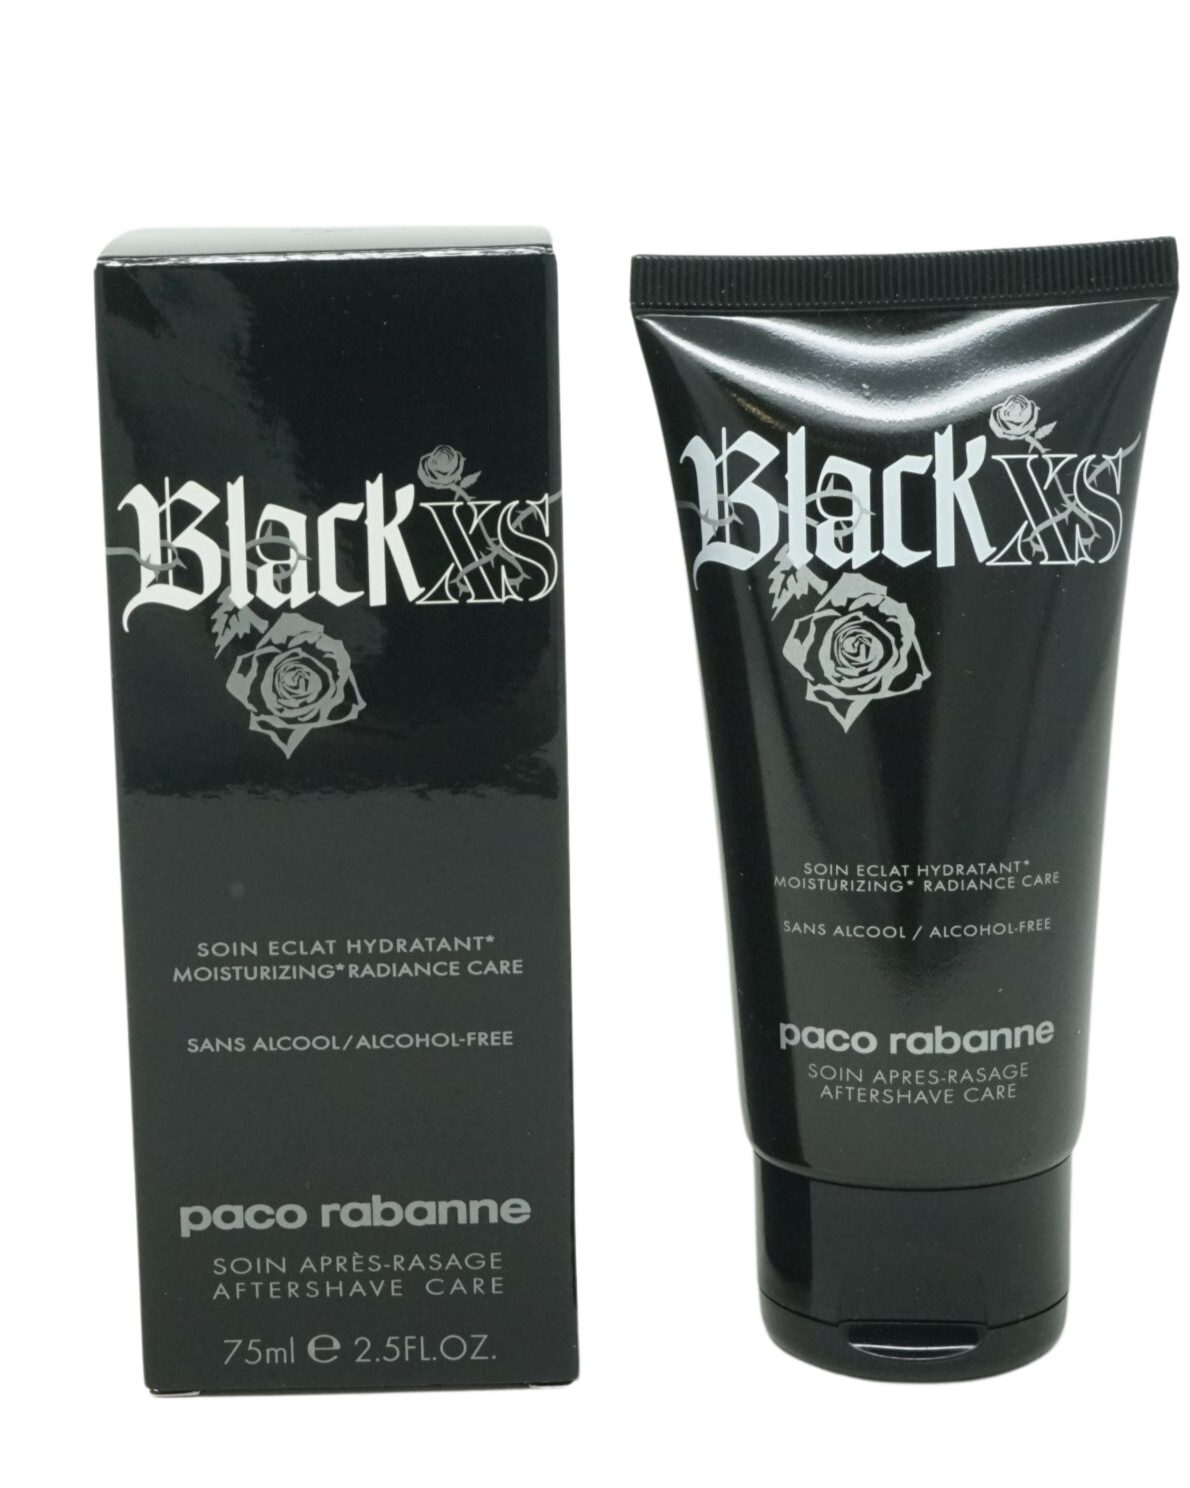 After Shave rabanne After-Shave 75ml Black paco Care paco XS Rabanne